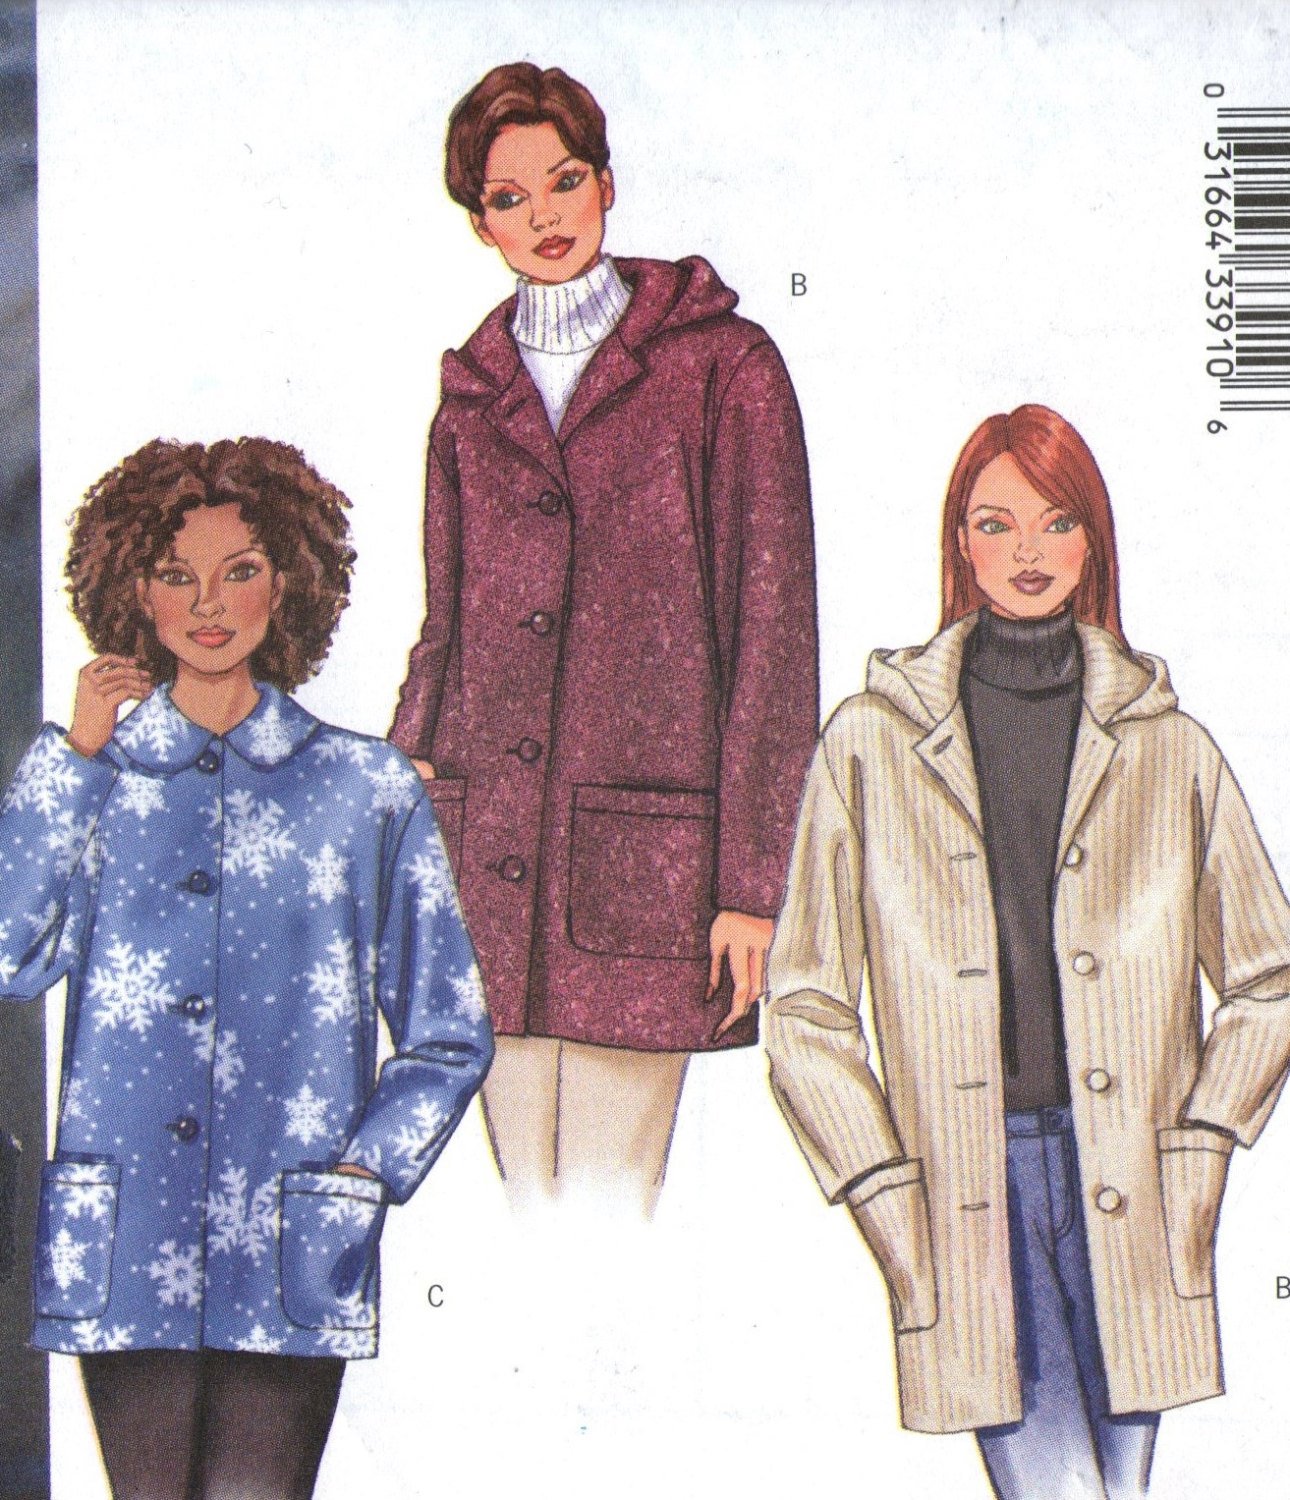 Butterick Women's Coats 3260 pattern review by annie11